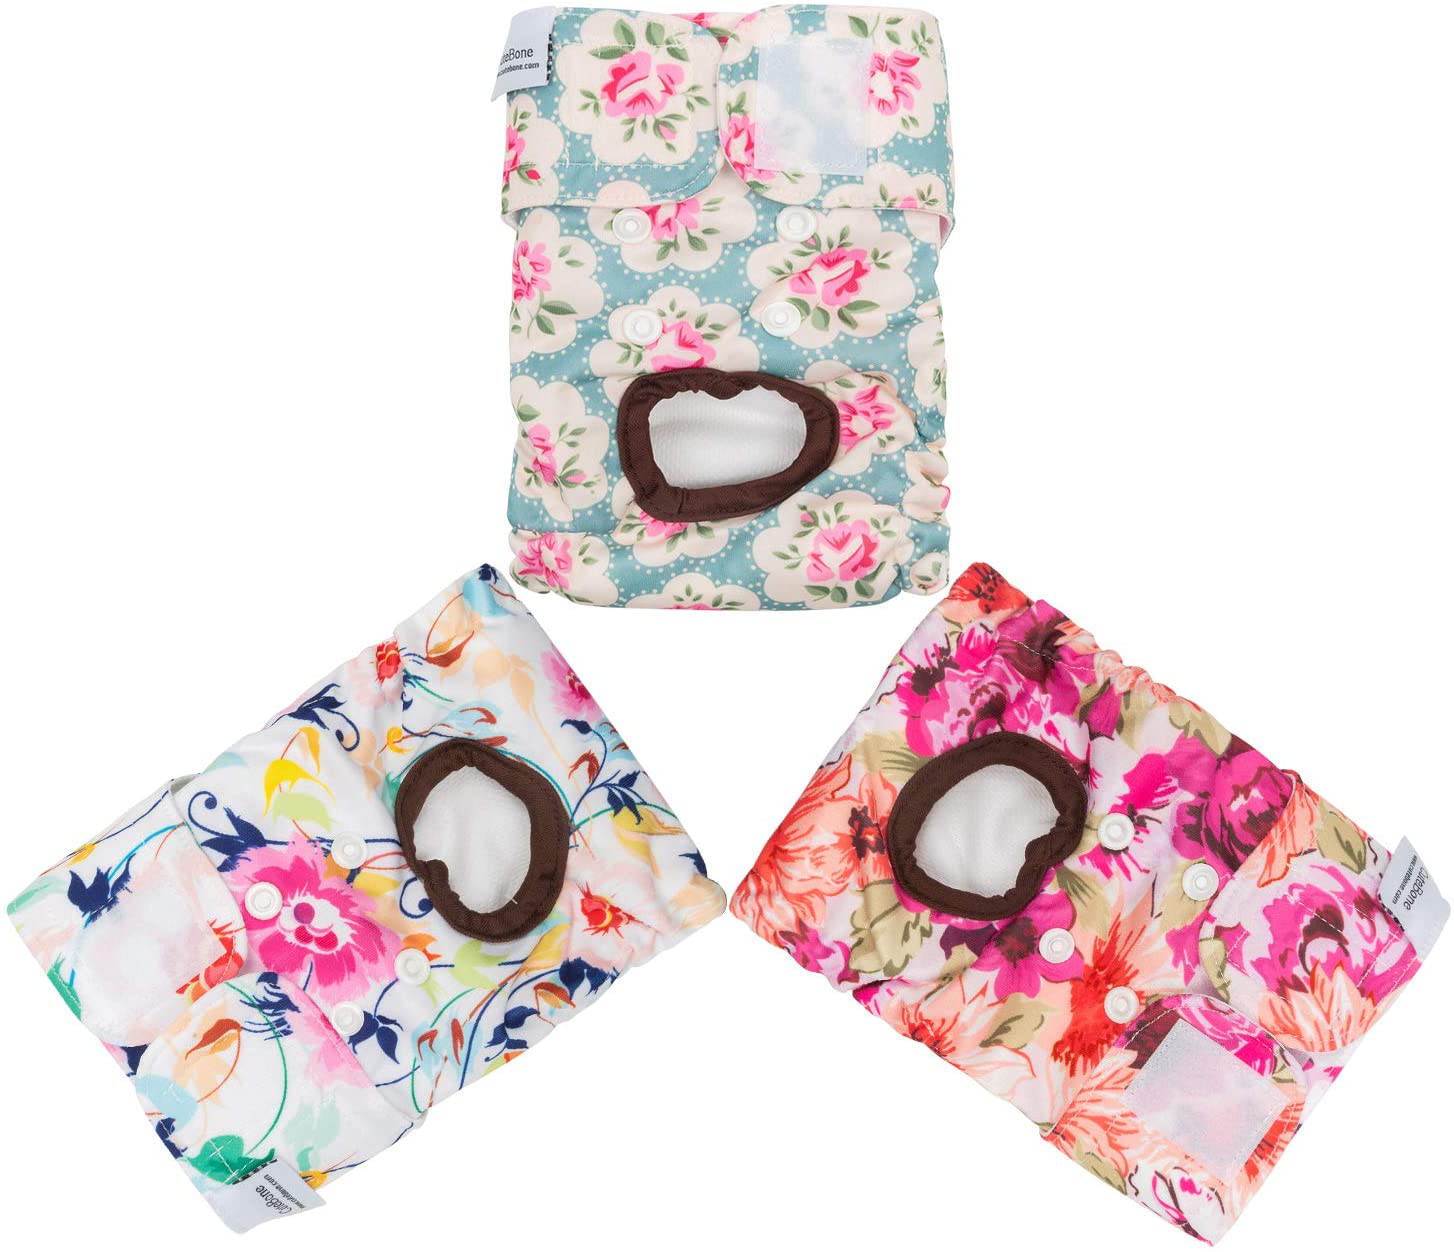 Cutebone Reusable Dog Diapers Female 3 Pack Washable Puppy Pants for Doggie Heat Period